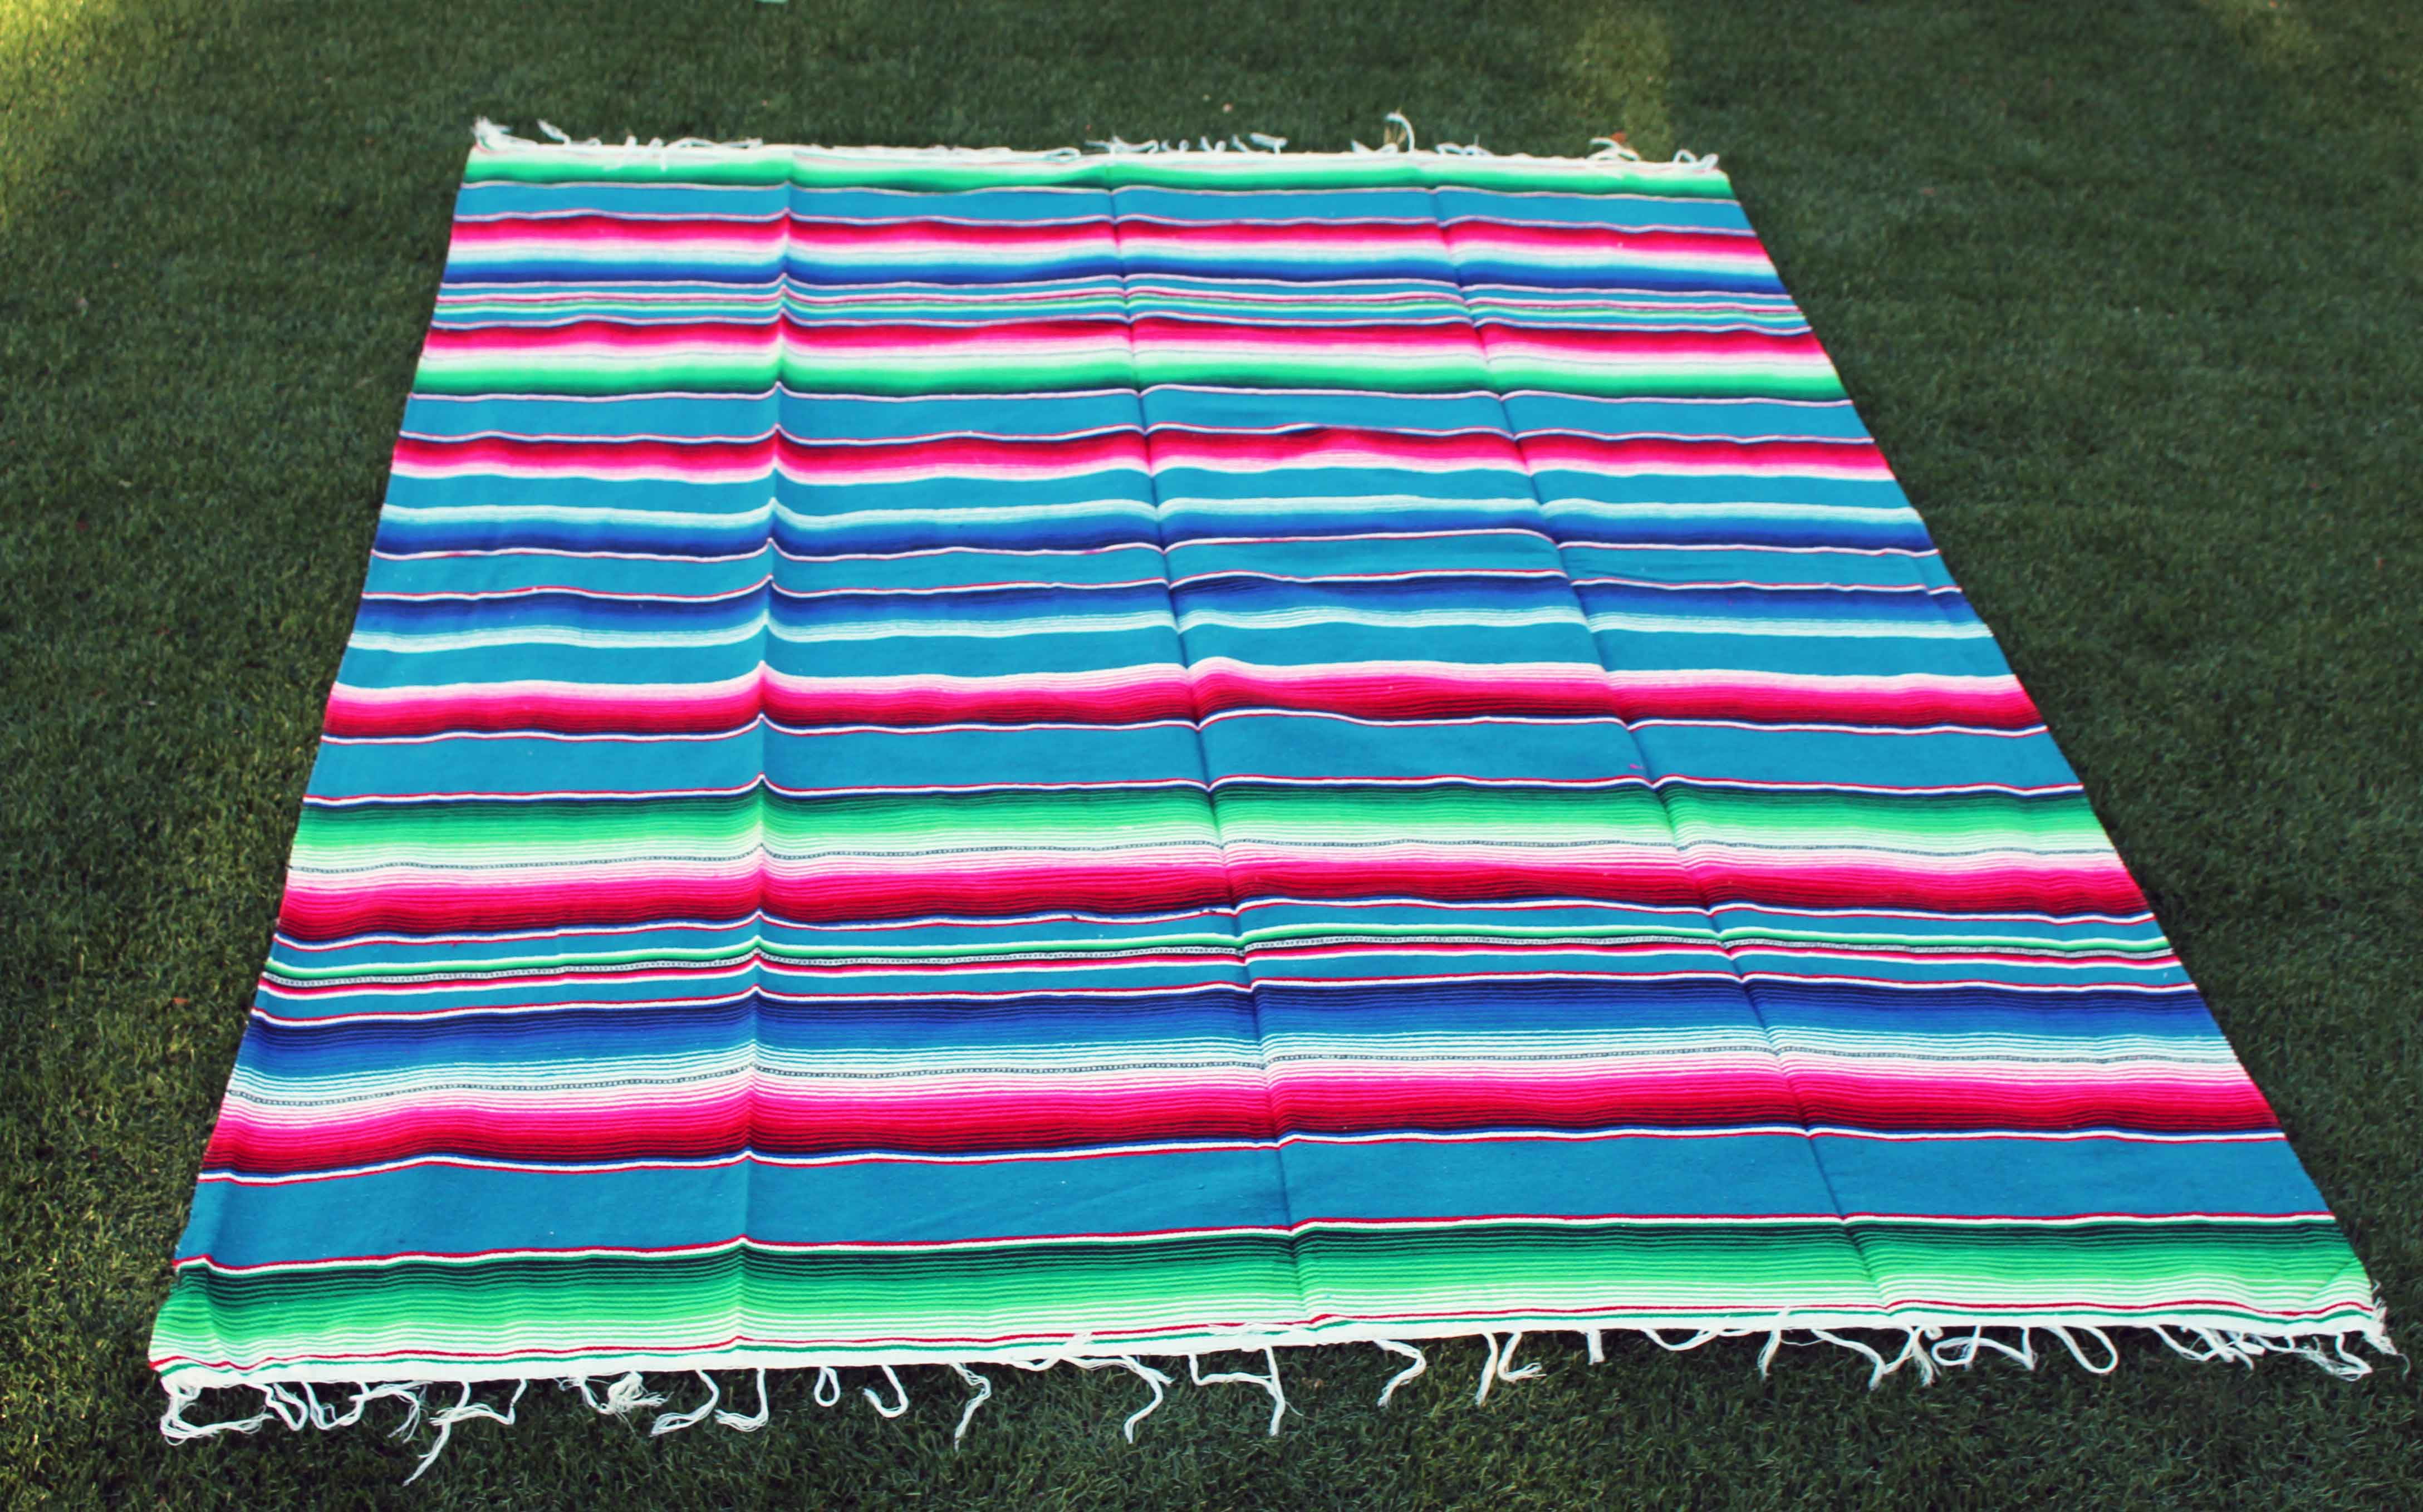 Authentic Navajo Blanket Beautiful Serape Blanket Fabric Car Outdoor Throw Blanket for Picnic Scuddles Premium Mexican Blanket Woven Blanket Perfect Yoga Meditation Mat Blue Camping 